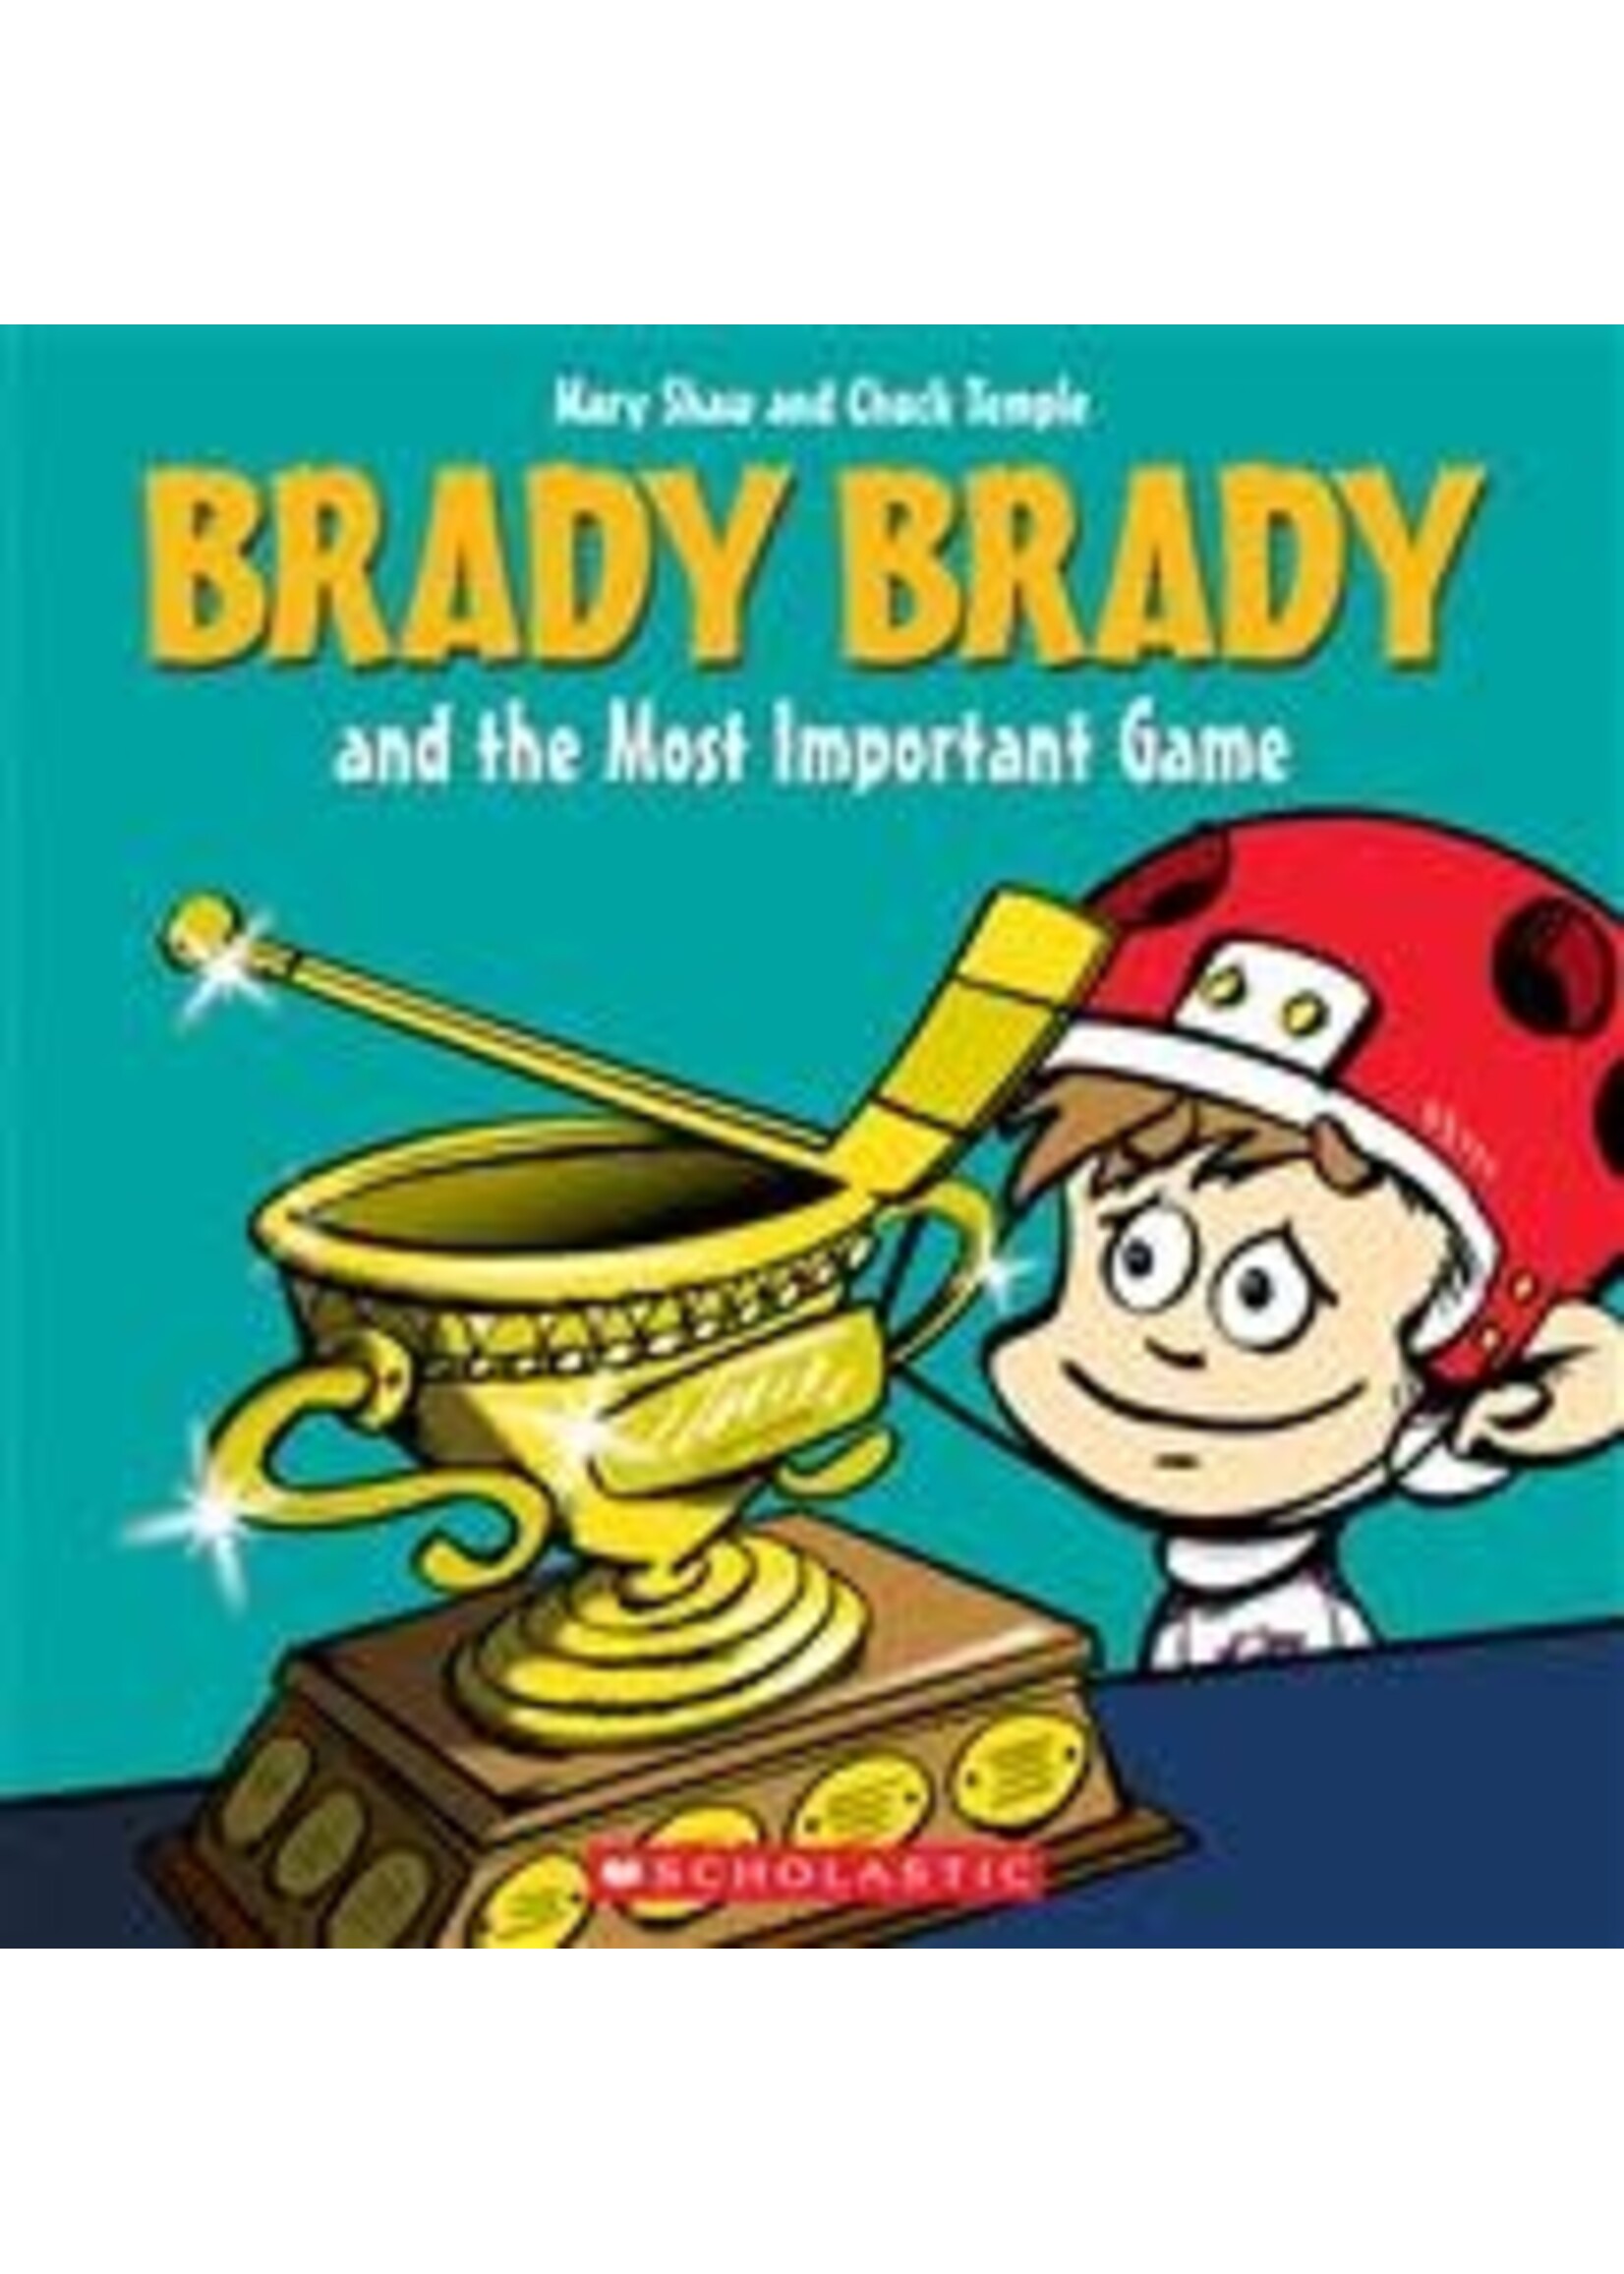 Brady Brady and the Most Important Game by Mary Shaw, Chuck Temple